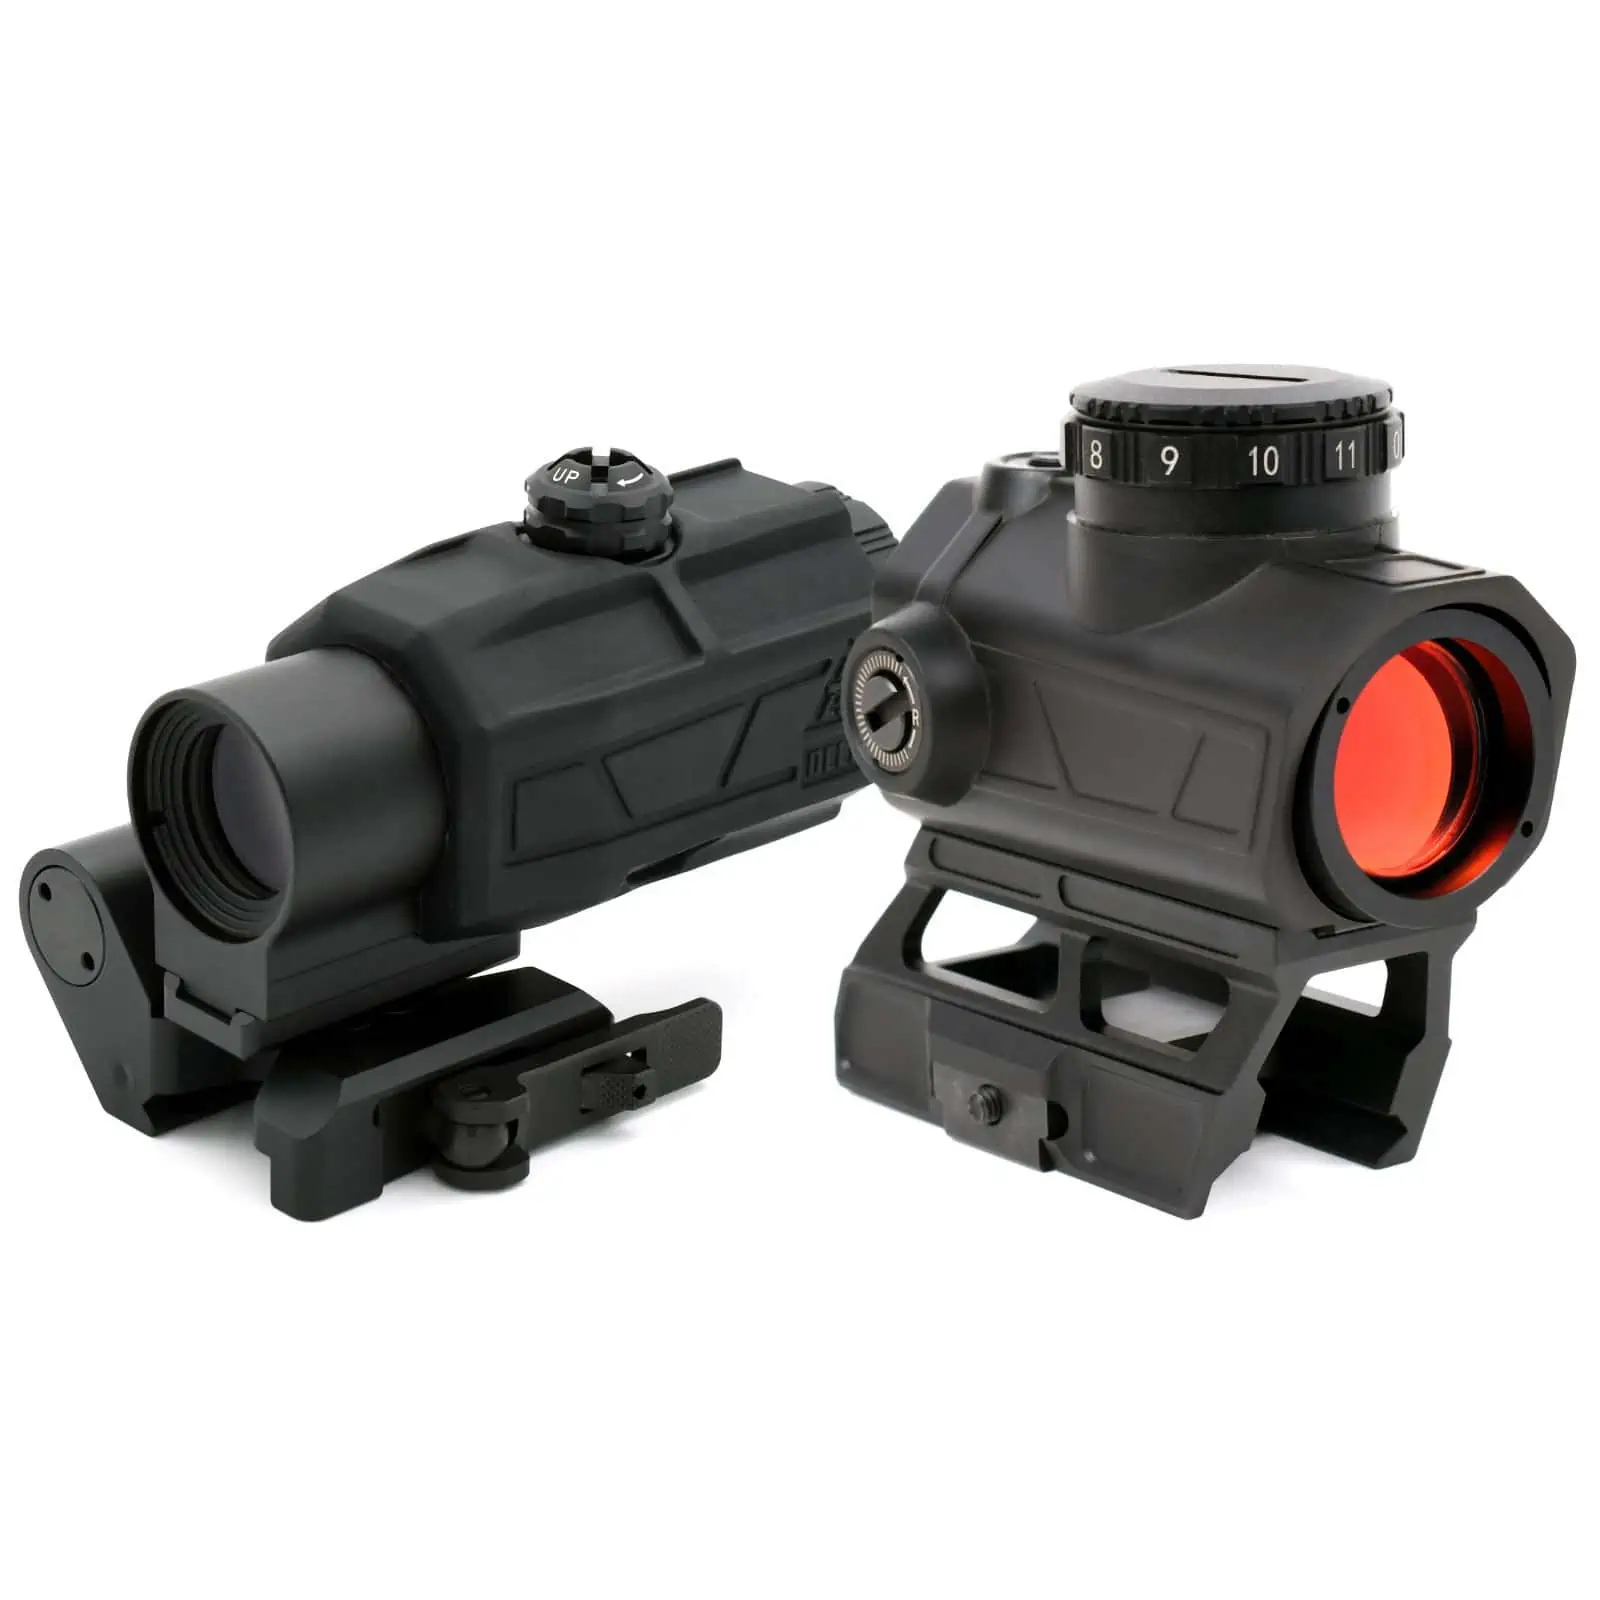 AT3™ ALPHA + DELTA Red Dot Kit – Includes Red Dot Sight & 3x Magnifier